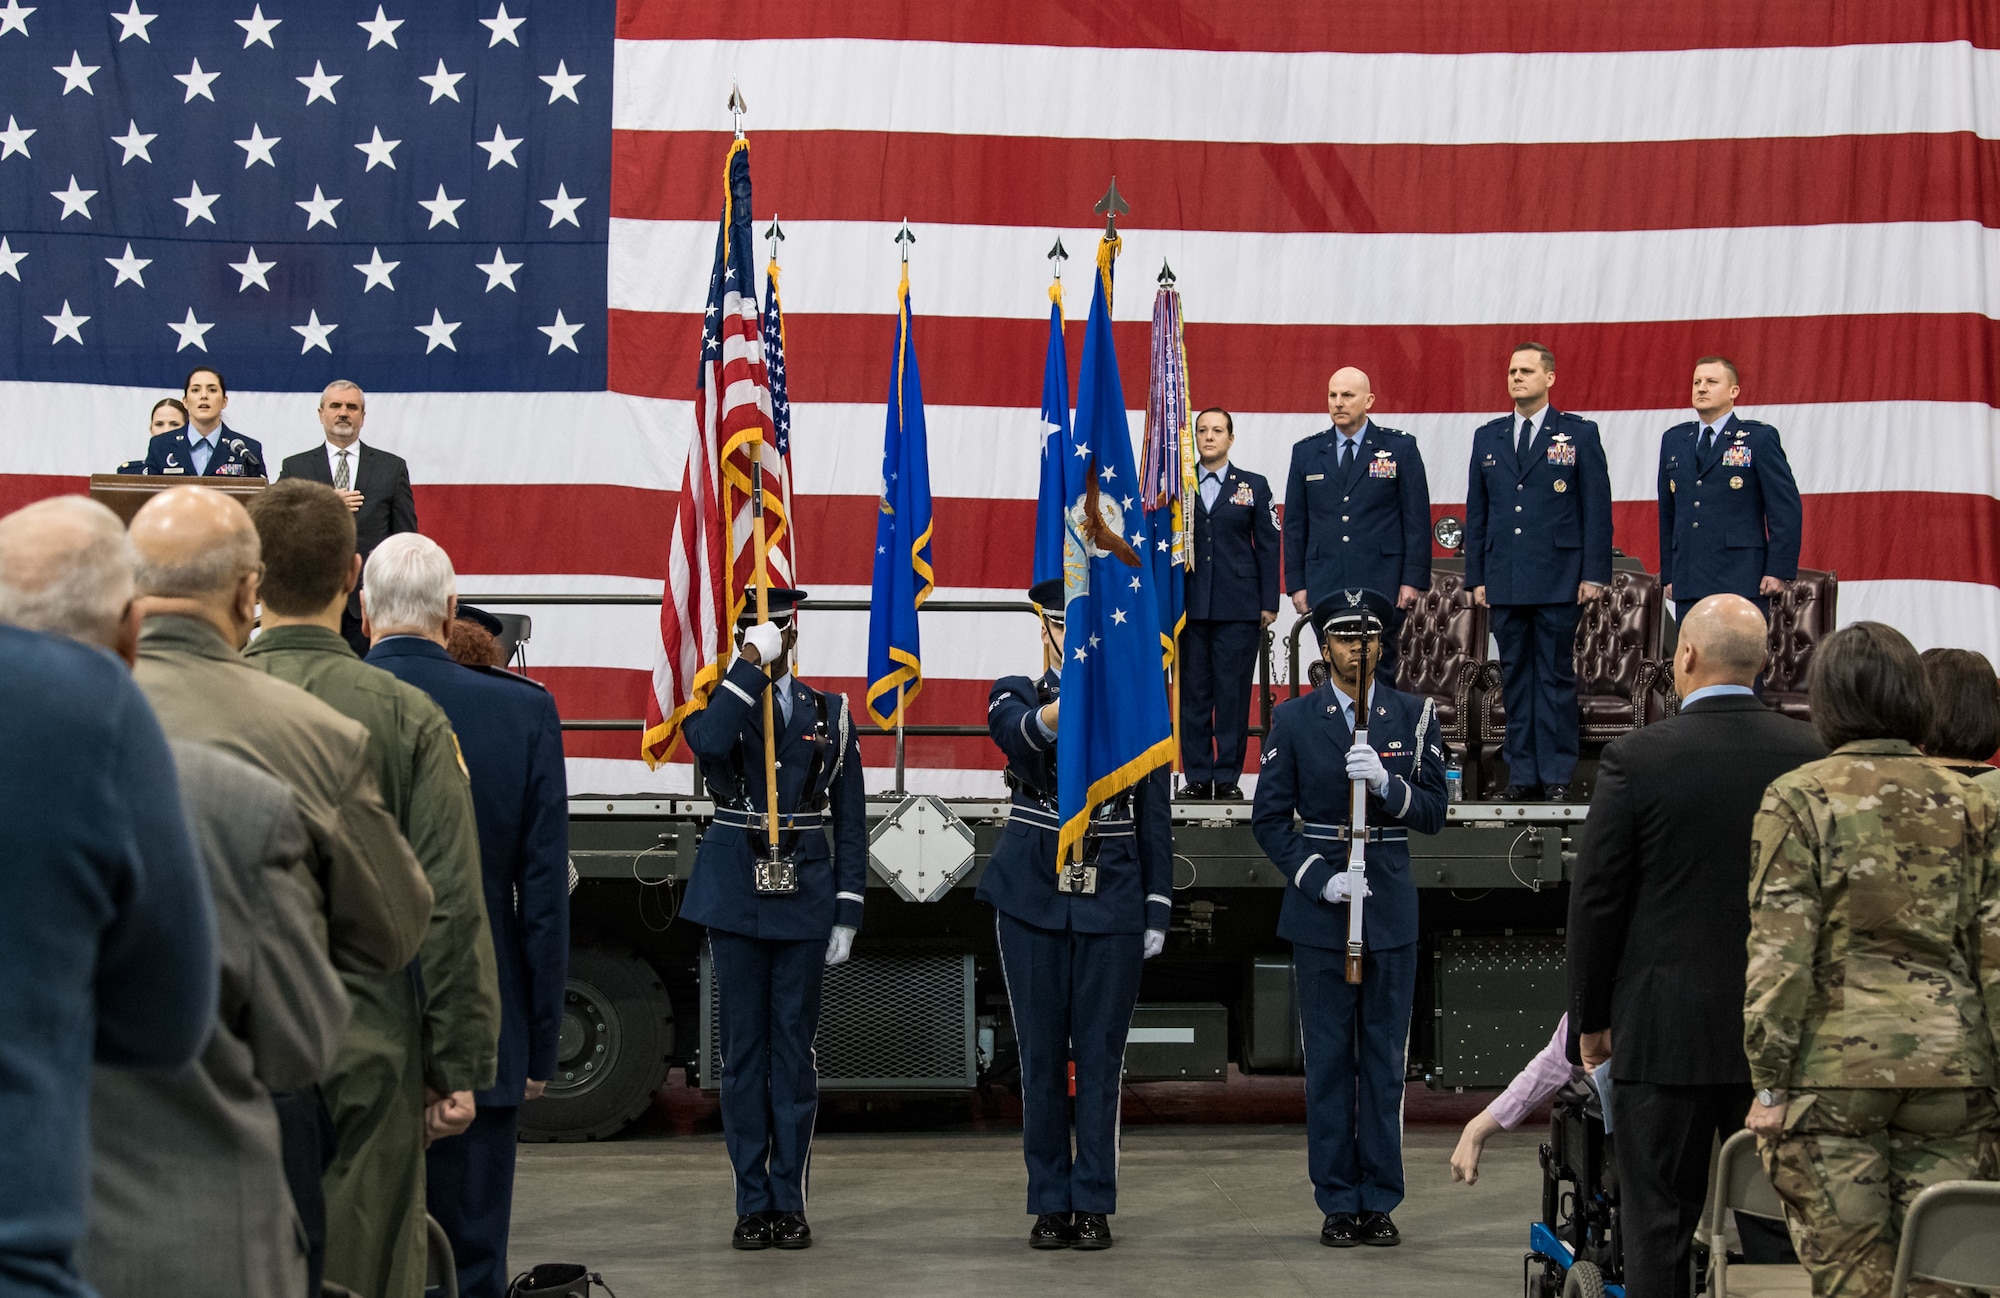 The 436th Airlift Wing Honor Guard posts the colors during the 436th AW Change of Command Jan. 7, 2020, inside the 436th Aerial Port Squadron, on Dover Air Force Base, Del. Staff Sgt. Alicia Garcia, 436th Force Support Squadron Airman Leadership School instructor, performed the national anthem during the ceremony. (U.S. Air Force photo by Roland Balik)